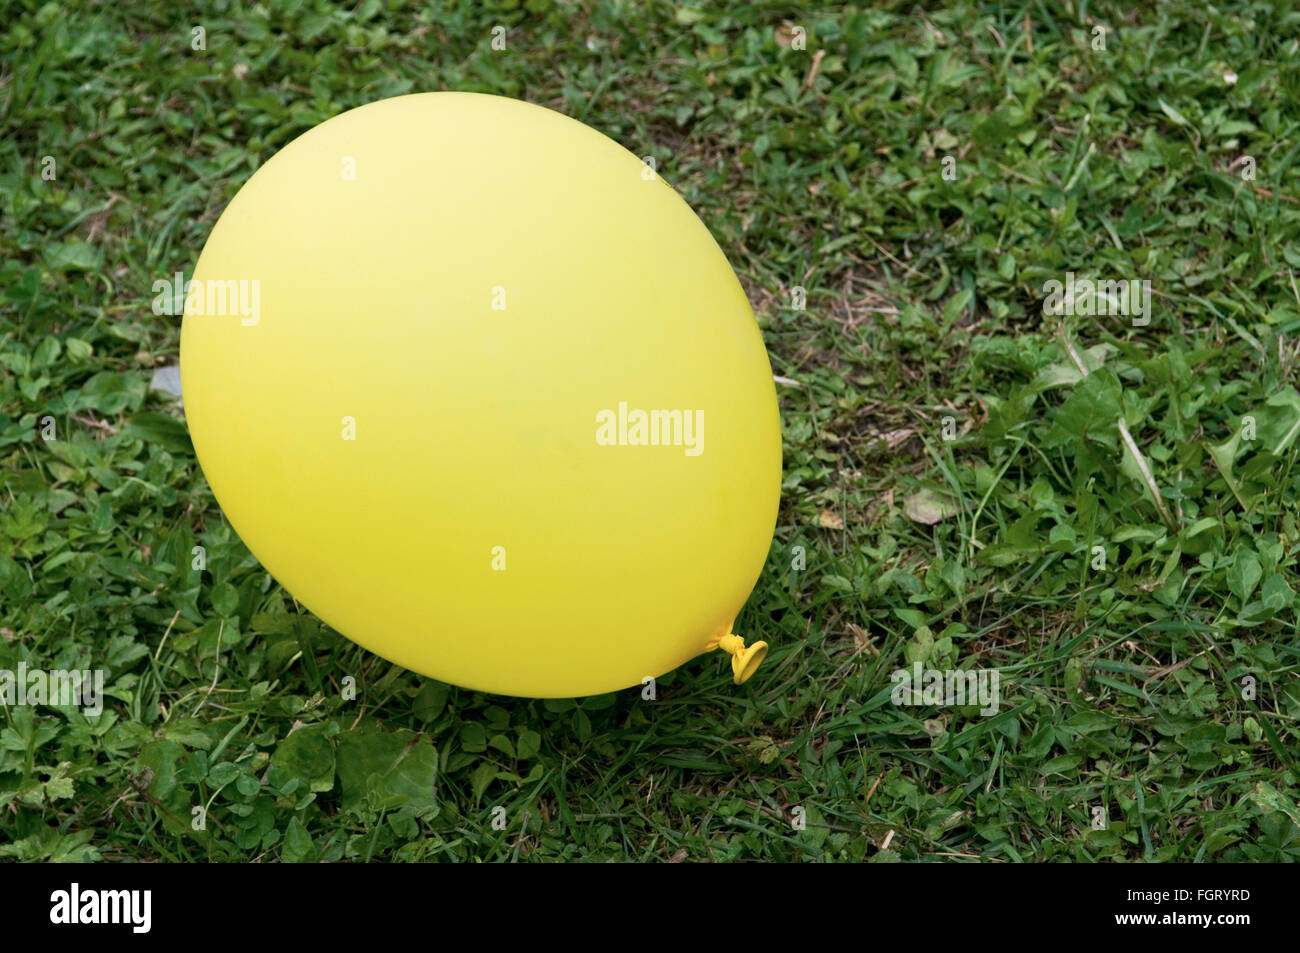 inflated balloon on grass lawn Stock Photo